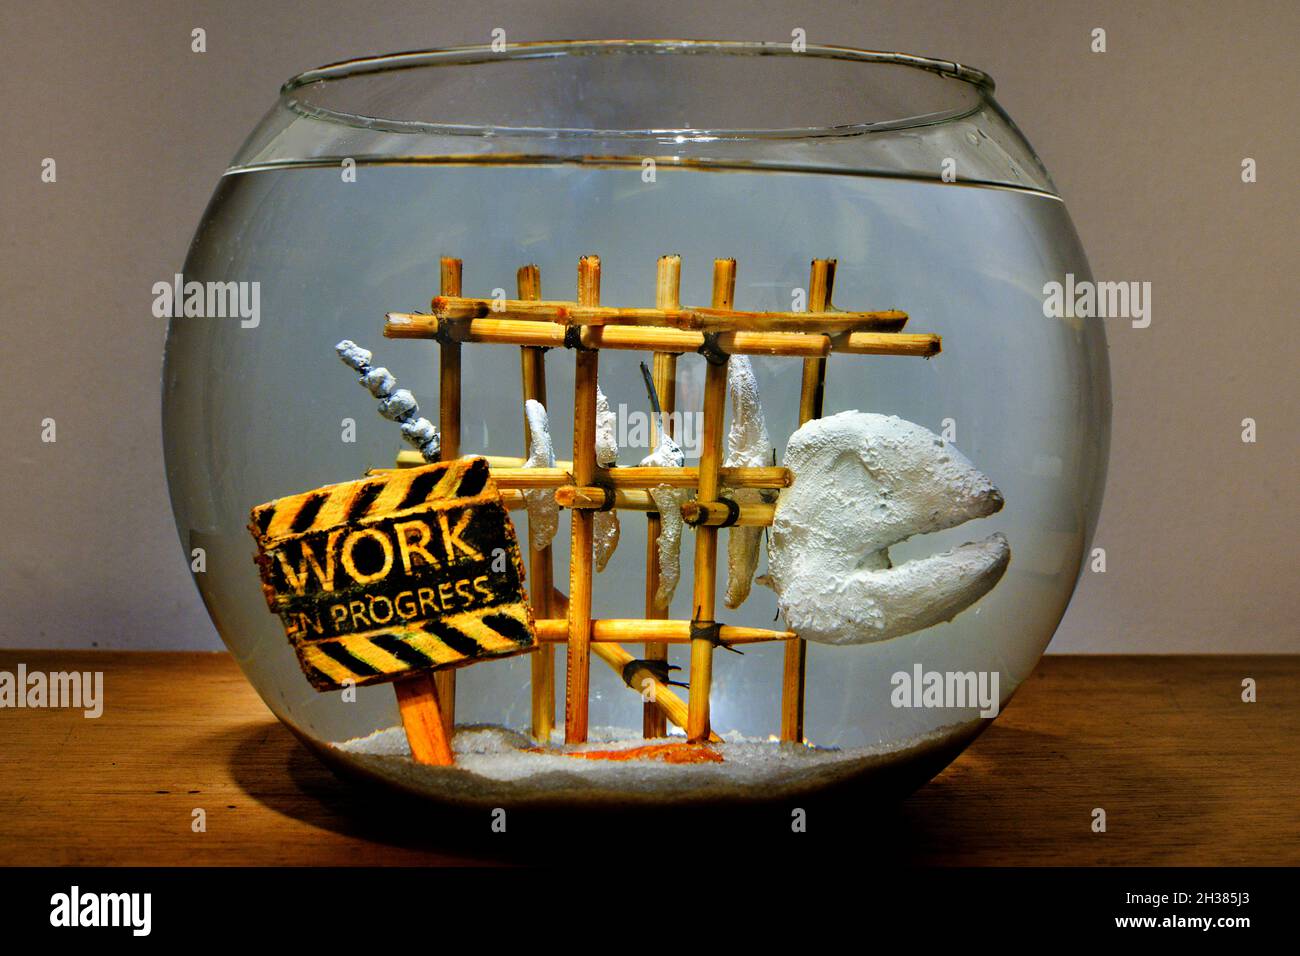 Aquarium bow with a work in progress sign by an unfinished art sculpture of a fish skeleton, Stock Photo